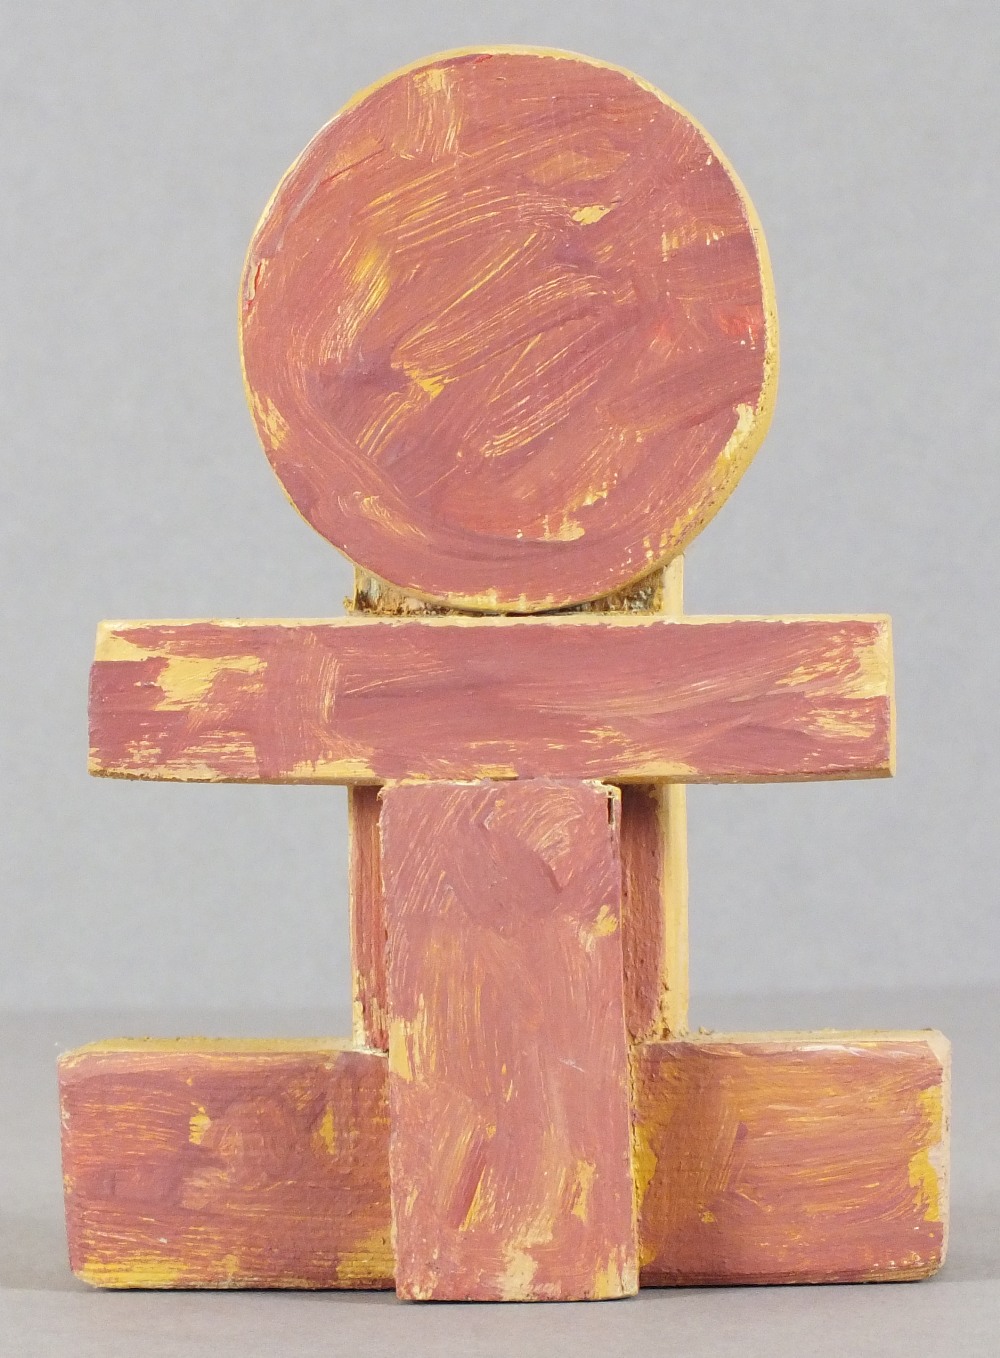 *Michael FINN (1921-2002) A wooden & painted cross 6” high (15.2cm) Provenance: Inscribed in